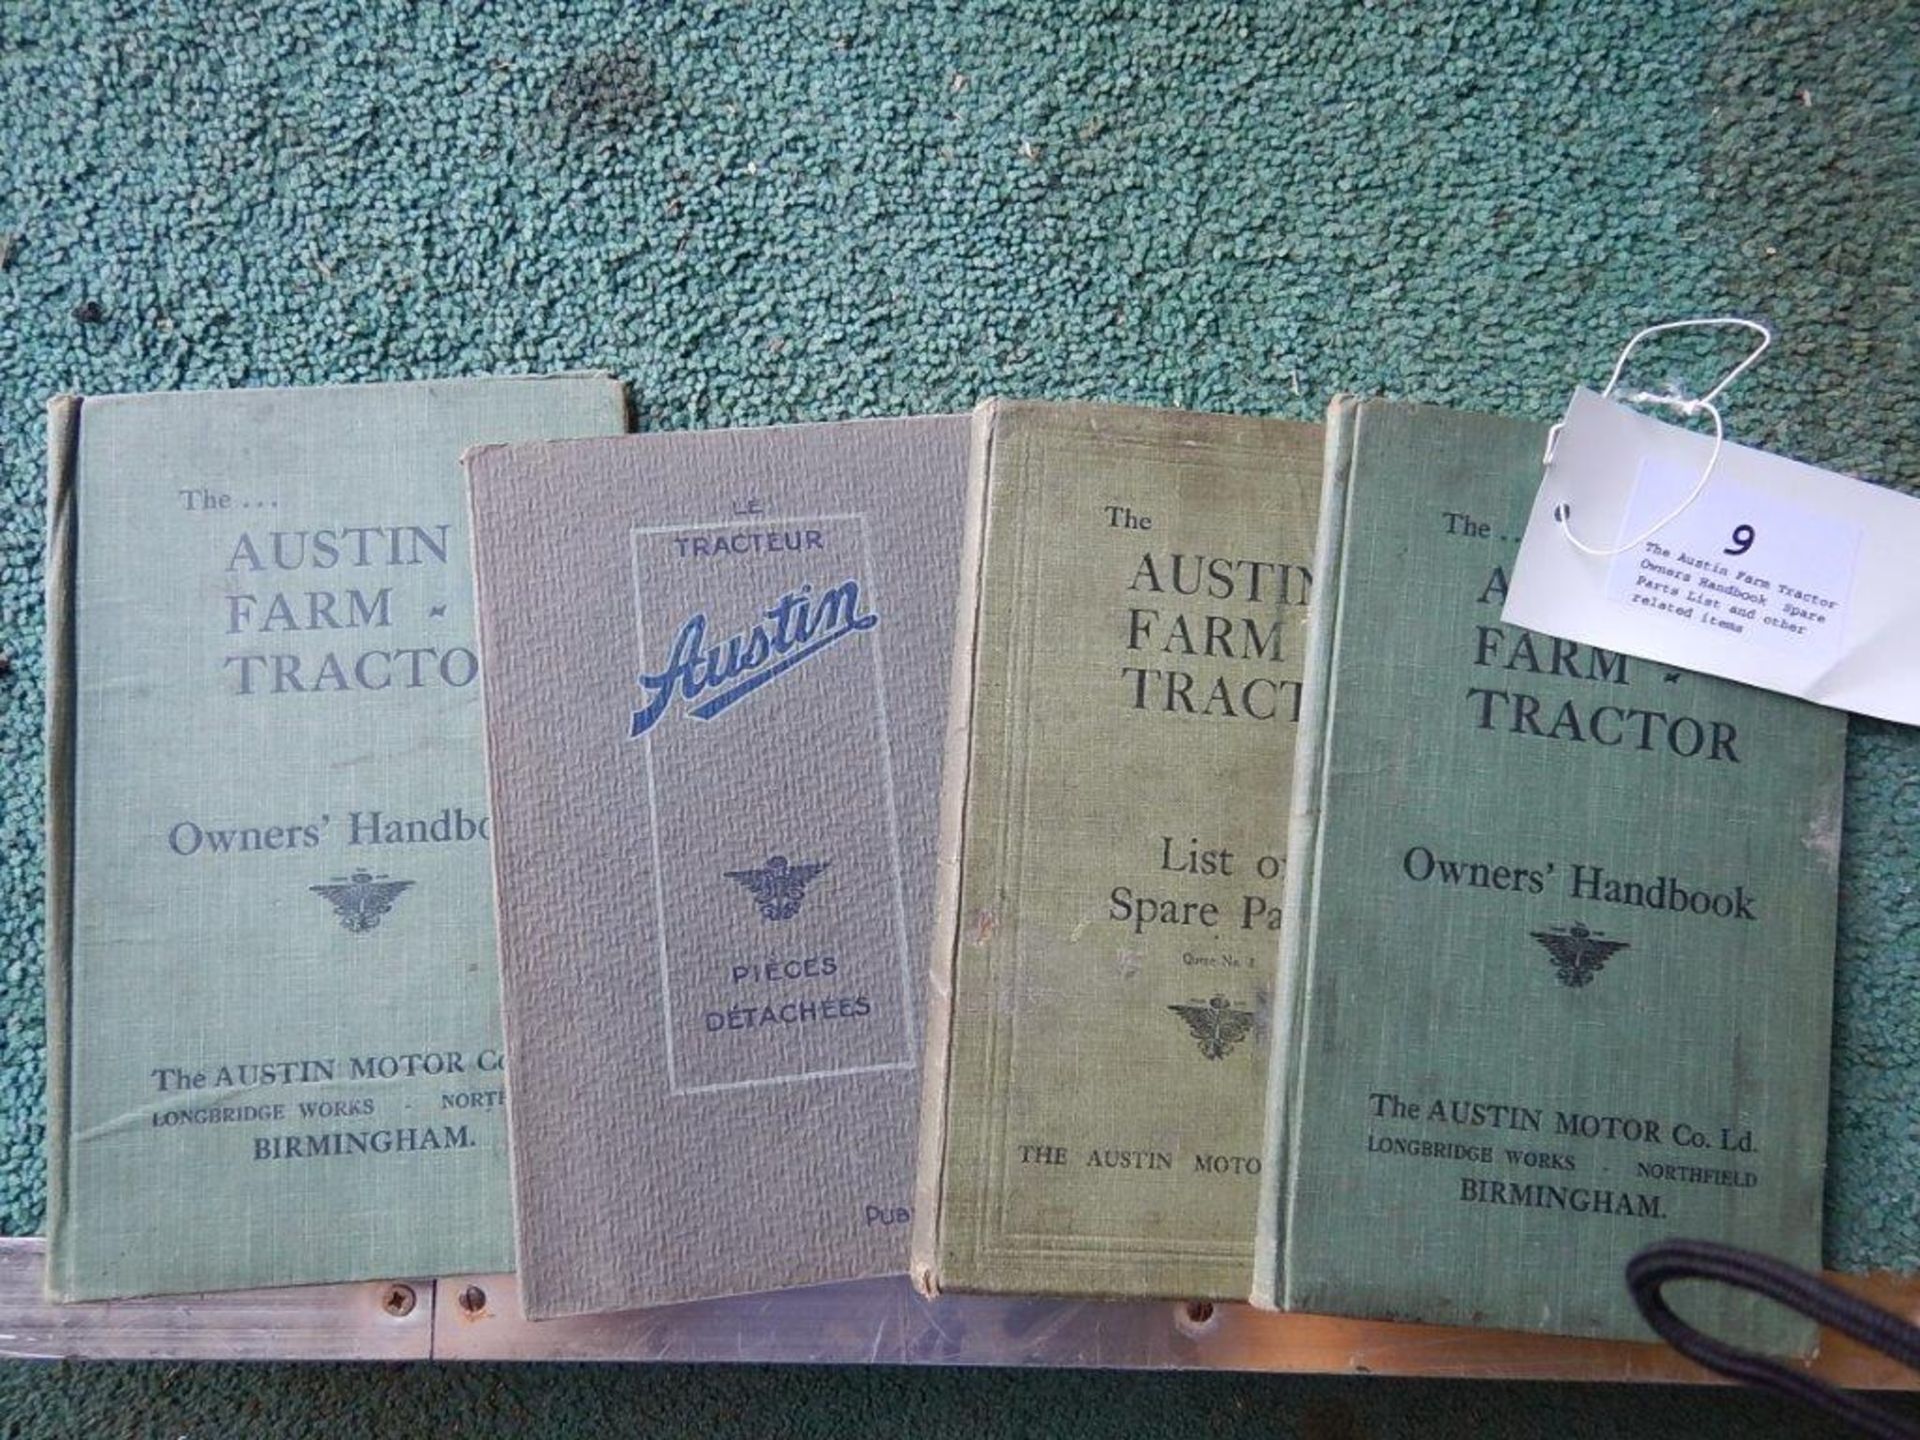 The Austin Farm Tractor Owners Handbook, Spare Parts List and other related items